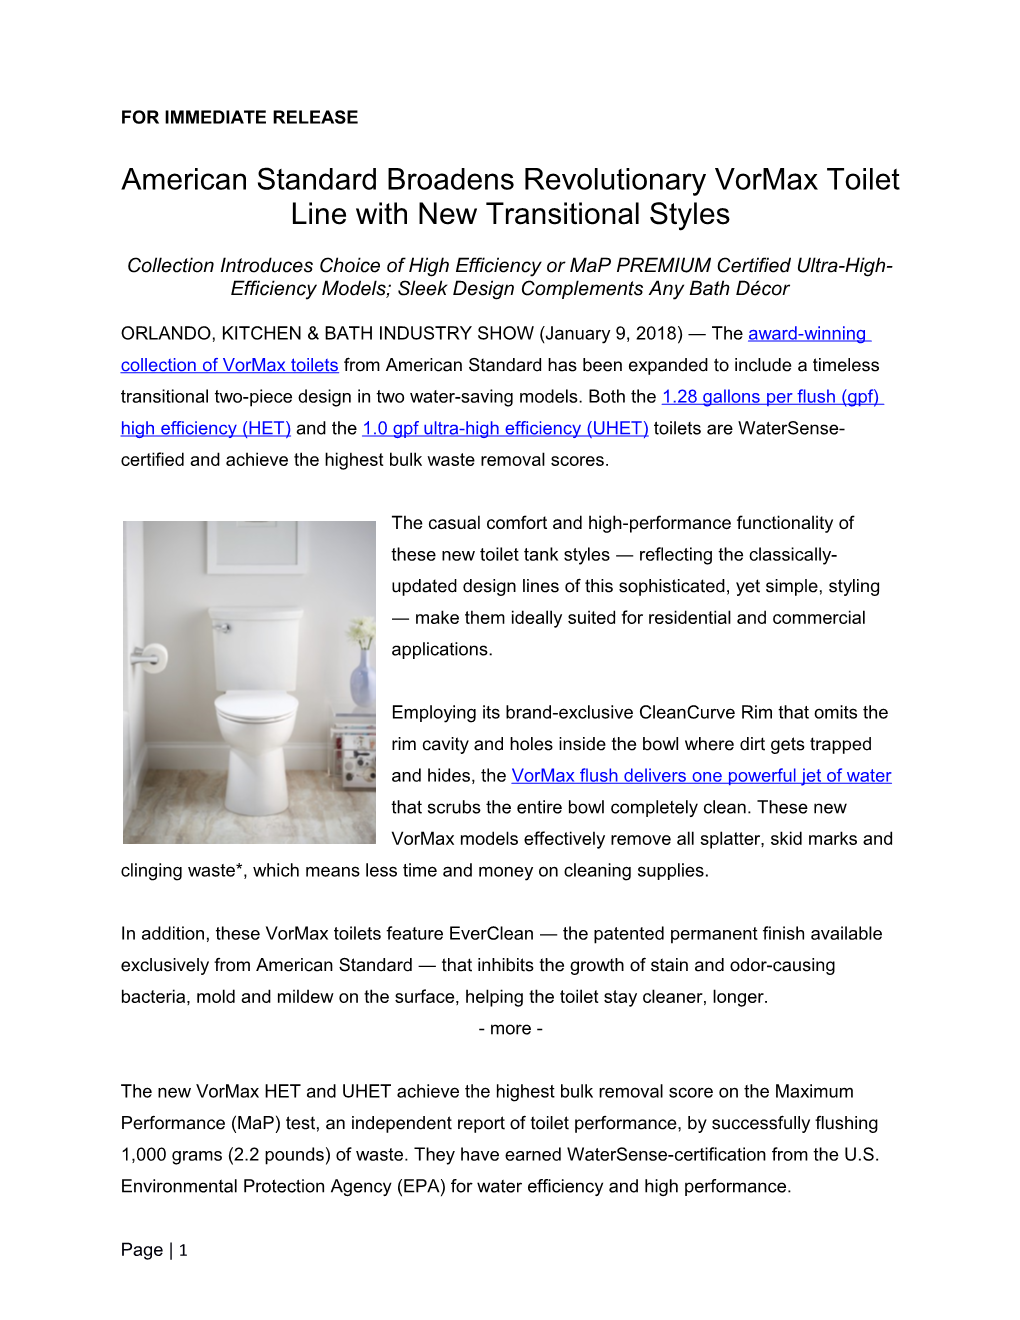 American Standard Broadens Revolutionary Vormax Toilet Line with New Transitional Styles